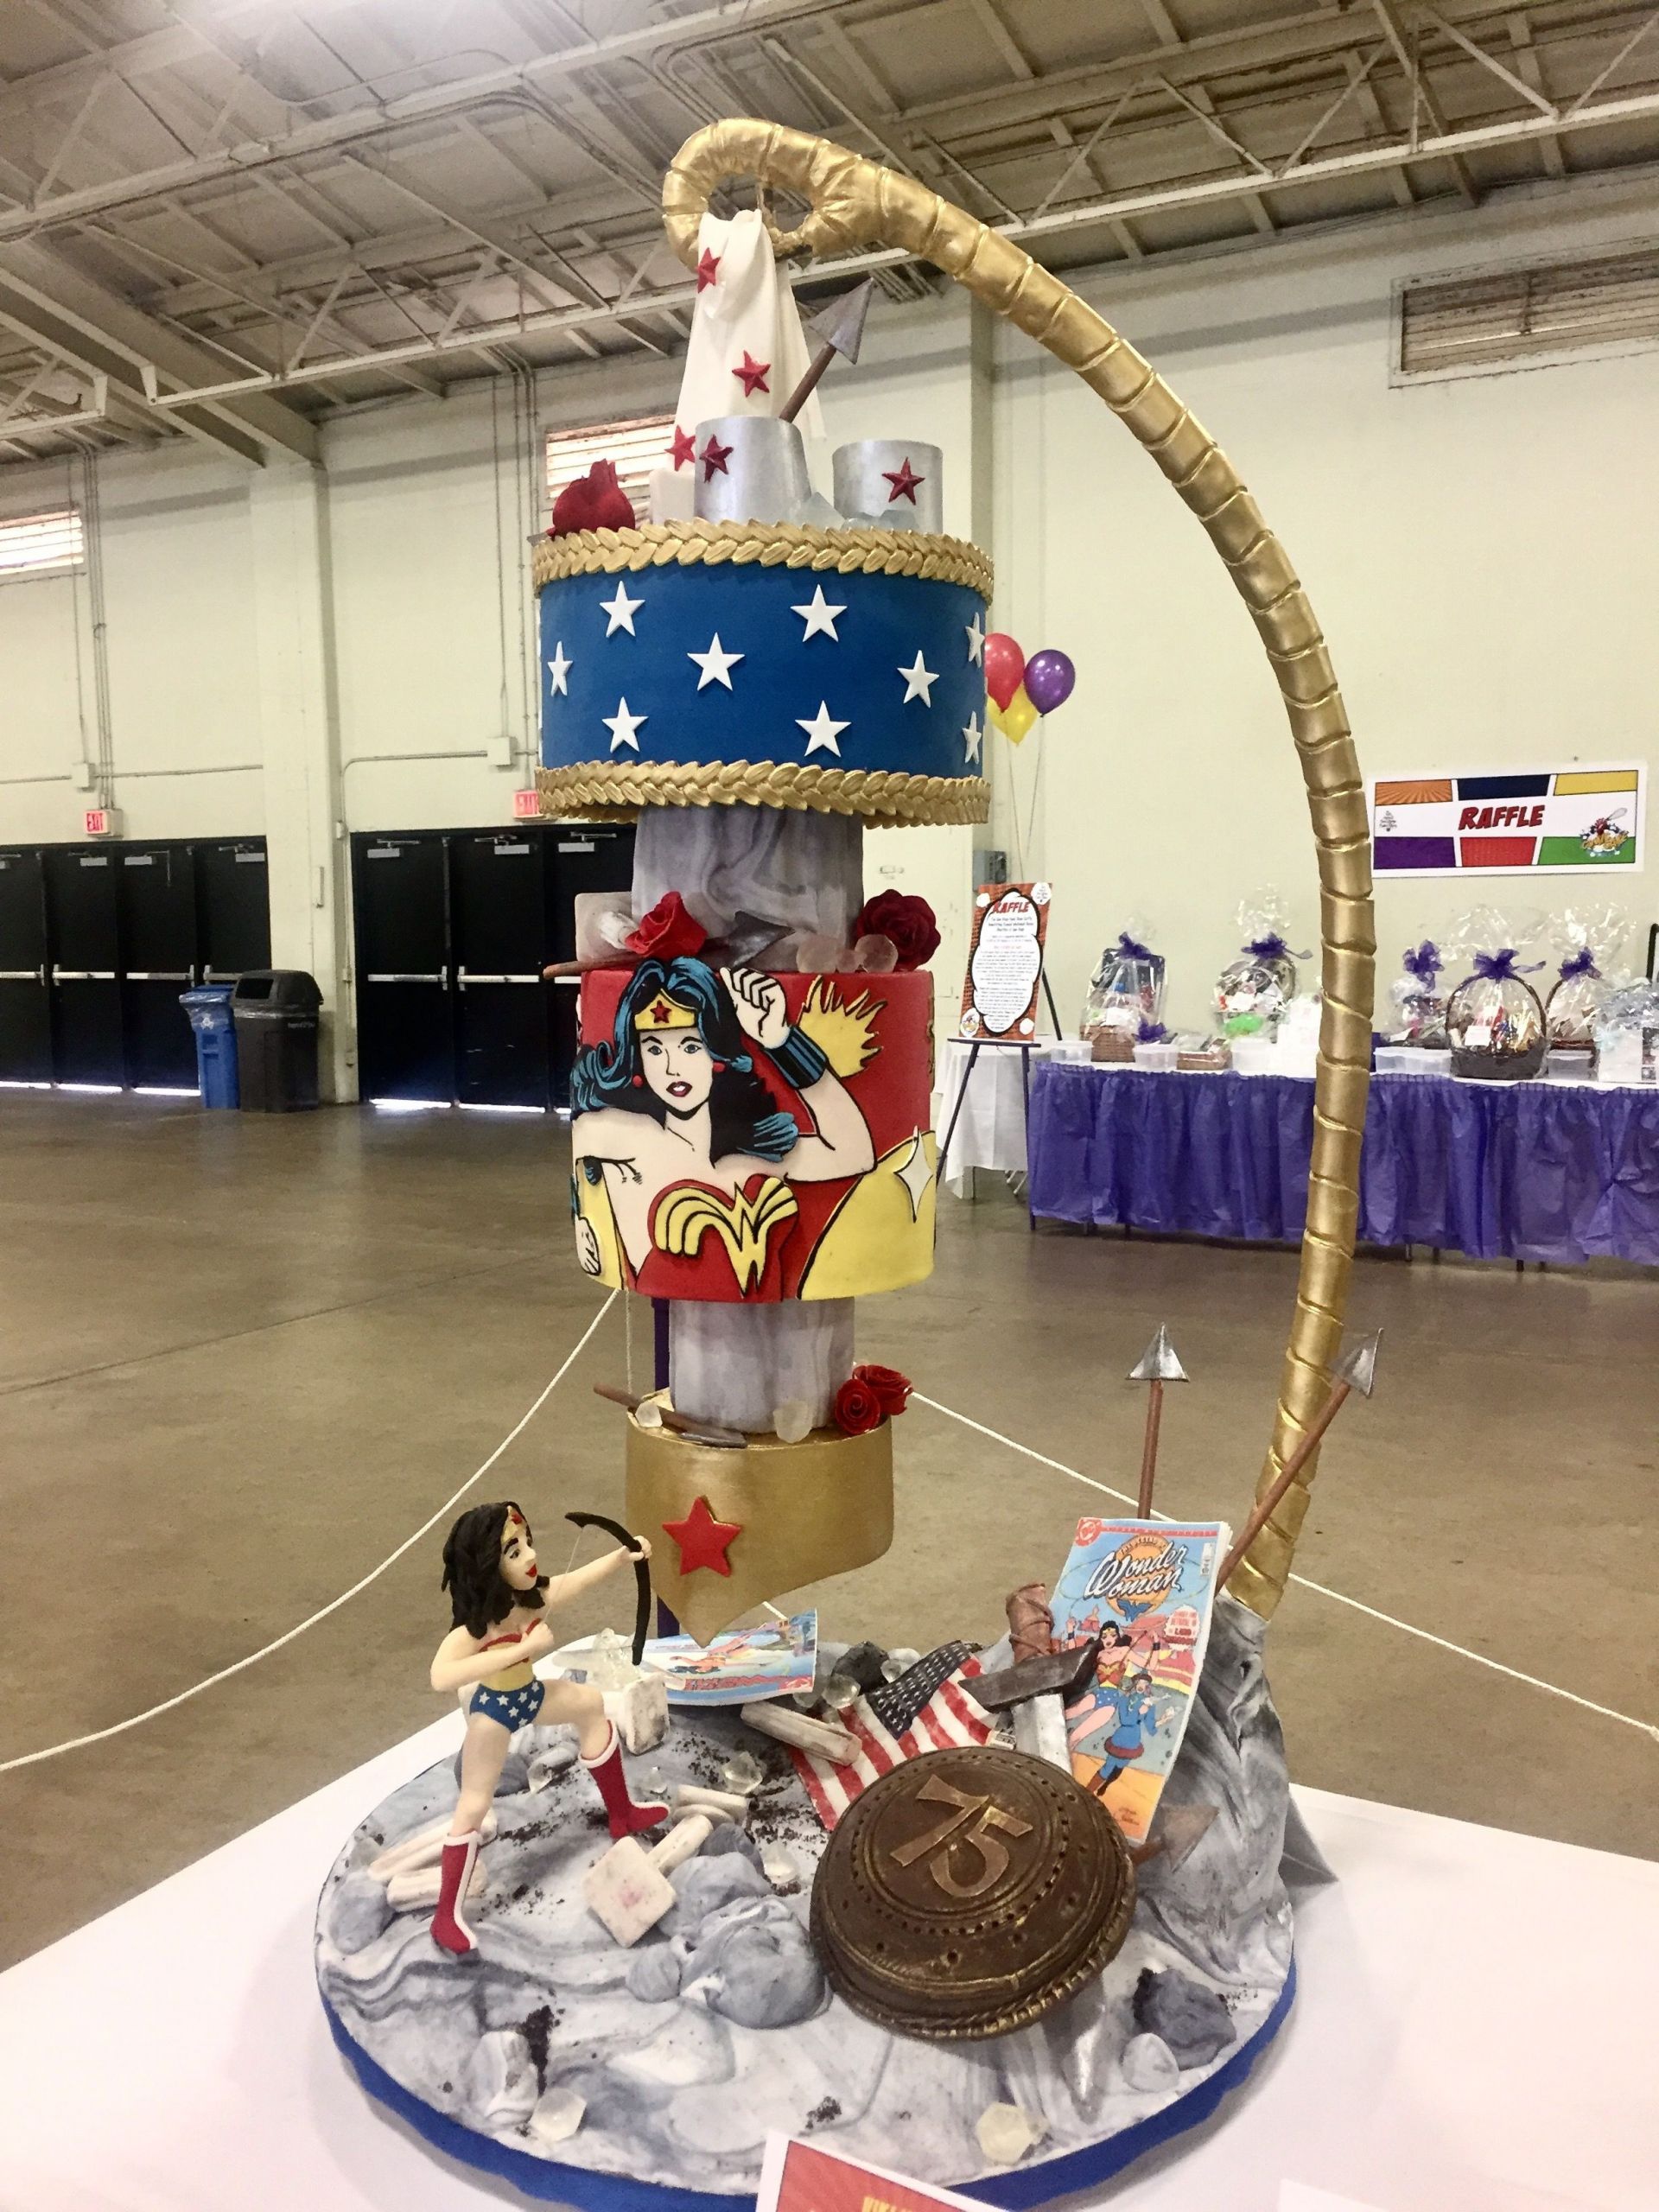 Birthday Cakes San Diego
 Pin by omnummy on 34th Annual San Diego Cake Show 2017